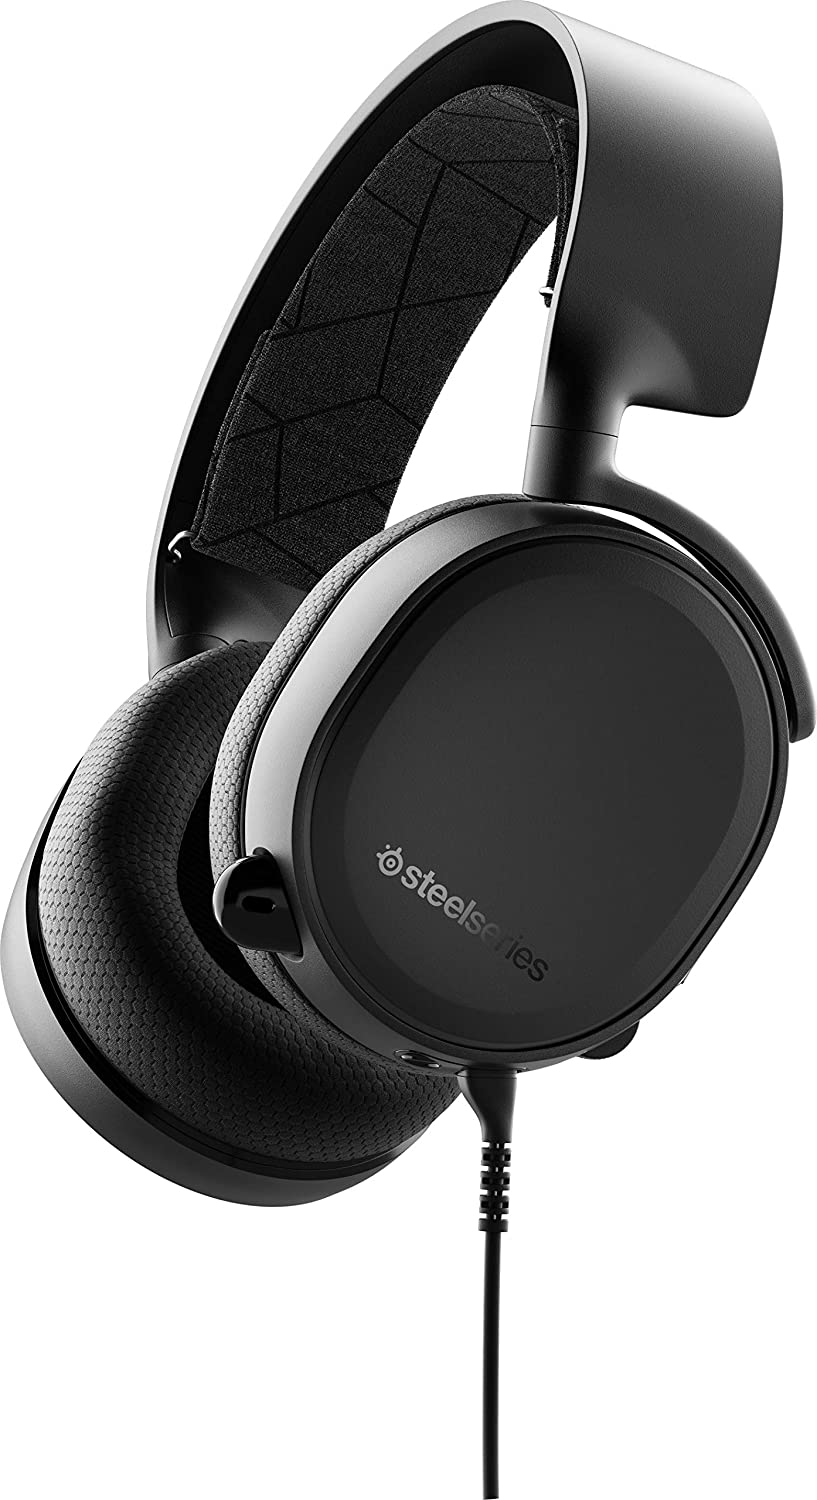 SteelSeries Arctis 3 Console - Stereo Wired Gaming Headset - Black [2020 Edition]